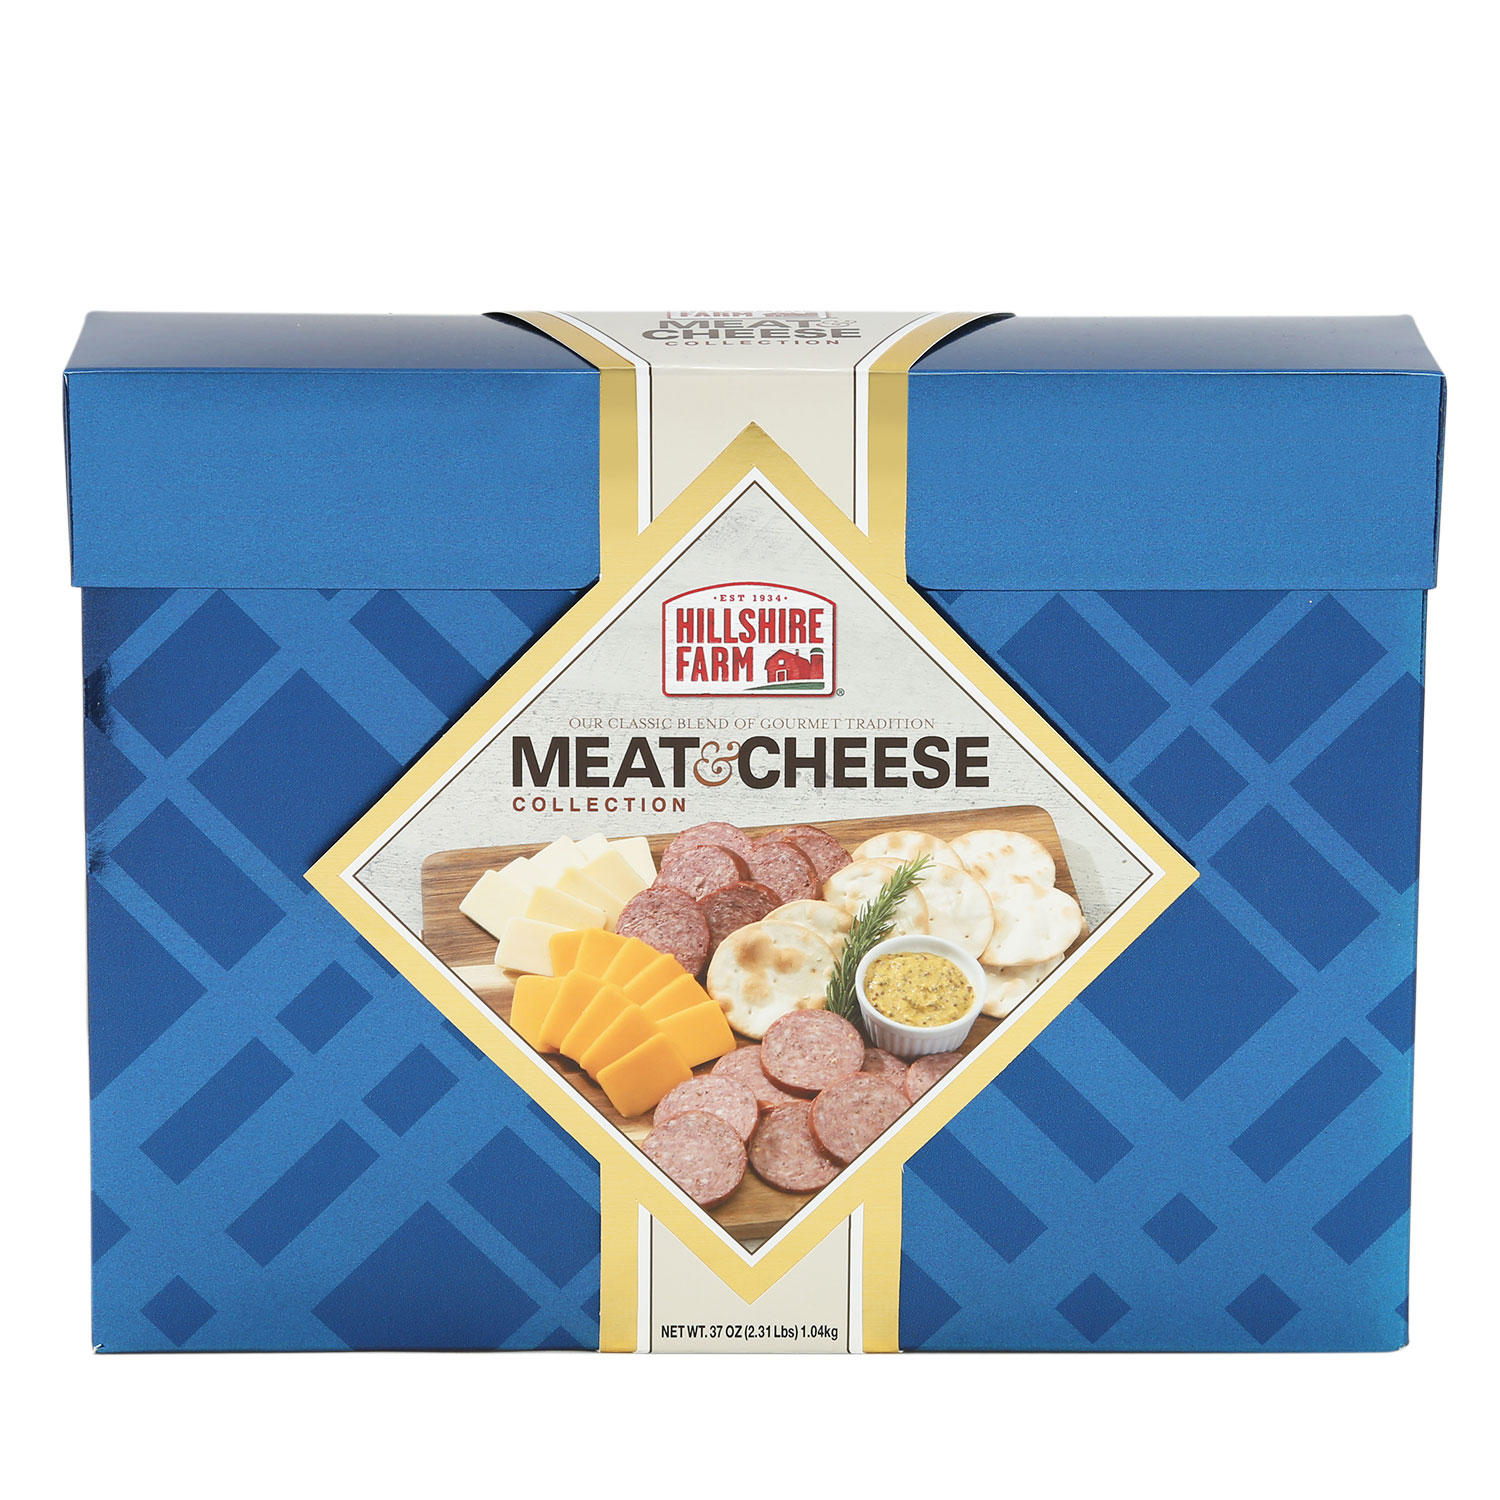 Hillshire Farms 37oz Meat & Cheese Collection - Clearance - $10.48 - Sams Club - YMMV